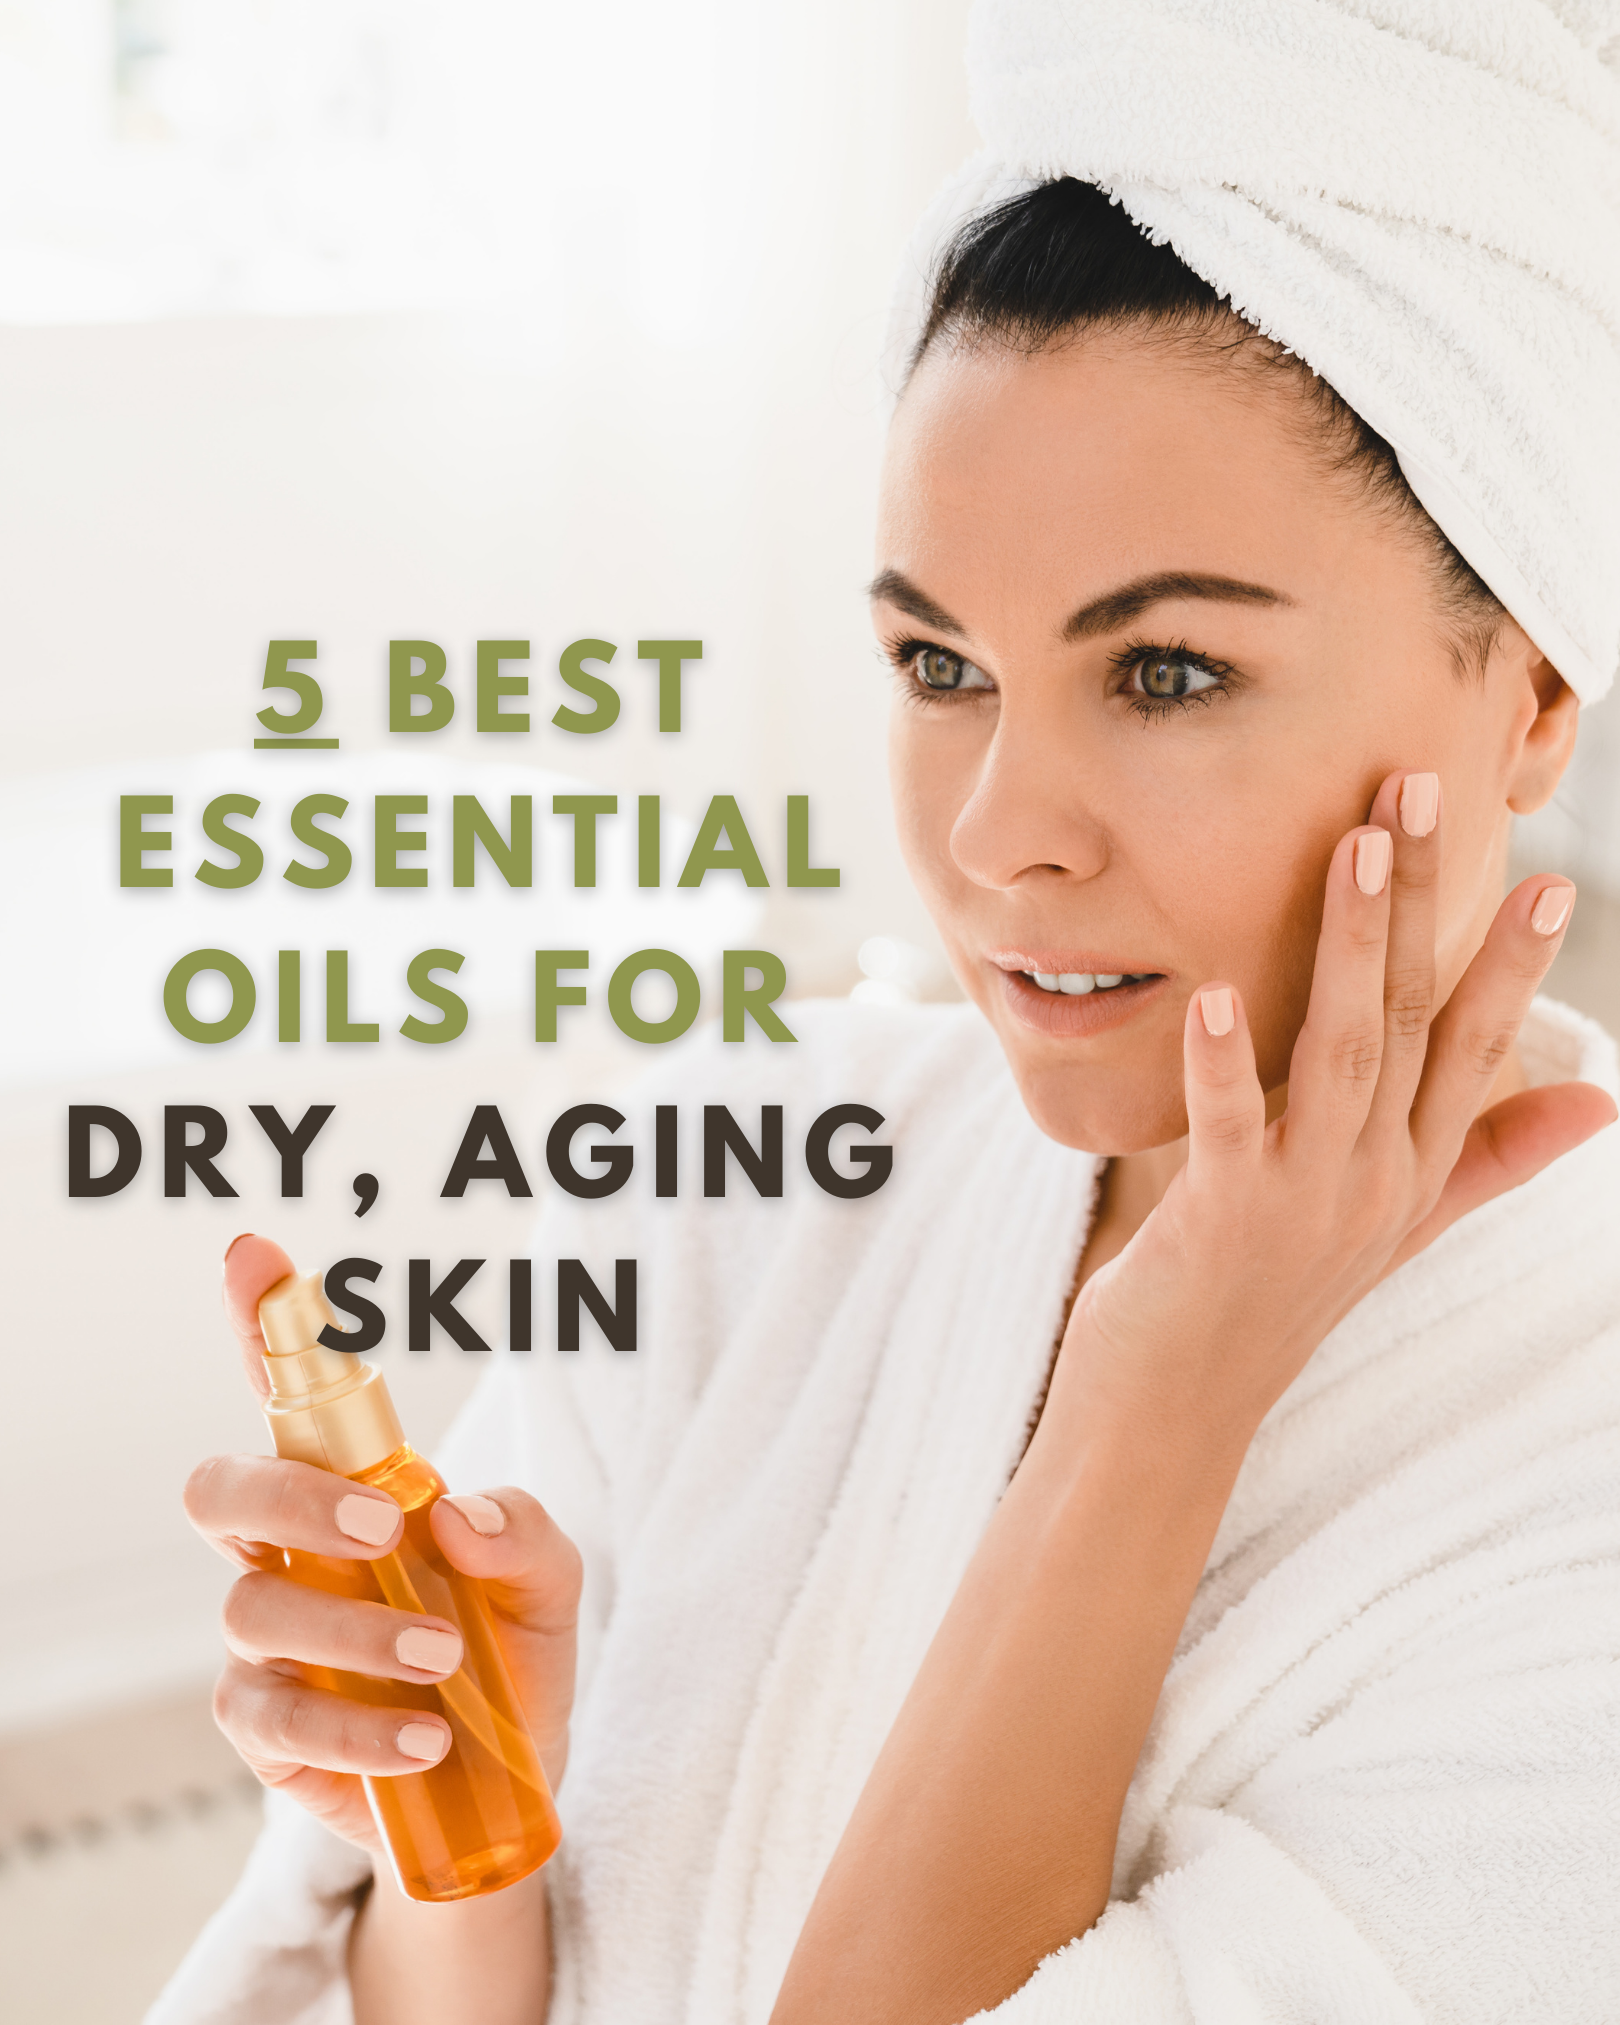 5 Best Essential Oils for Dry, Aging Skin: The Secret to a Youthful Glow | Best Life Reviews